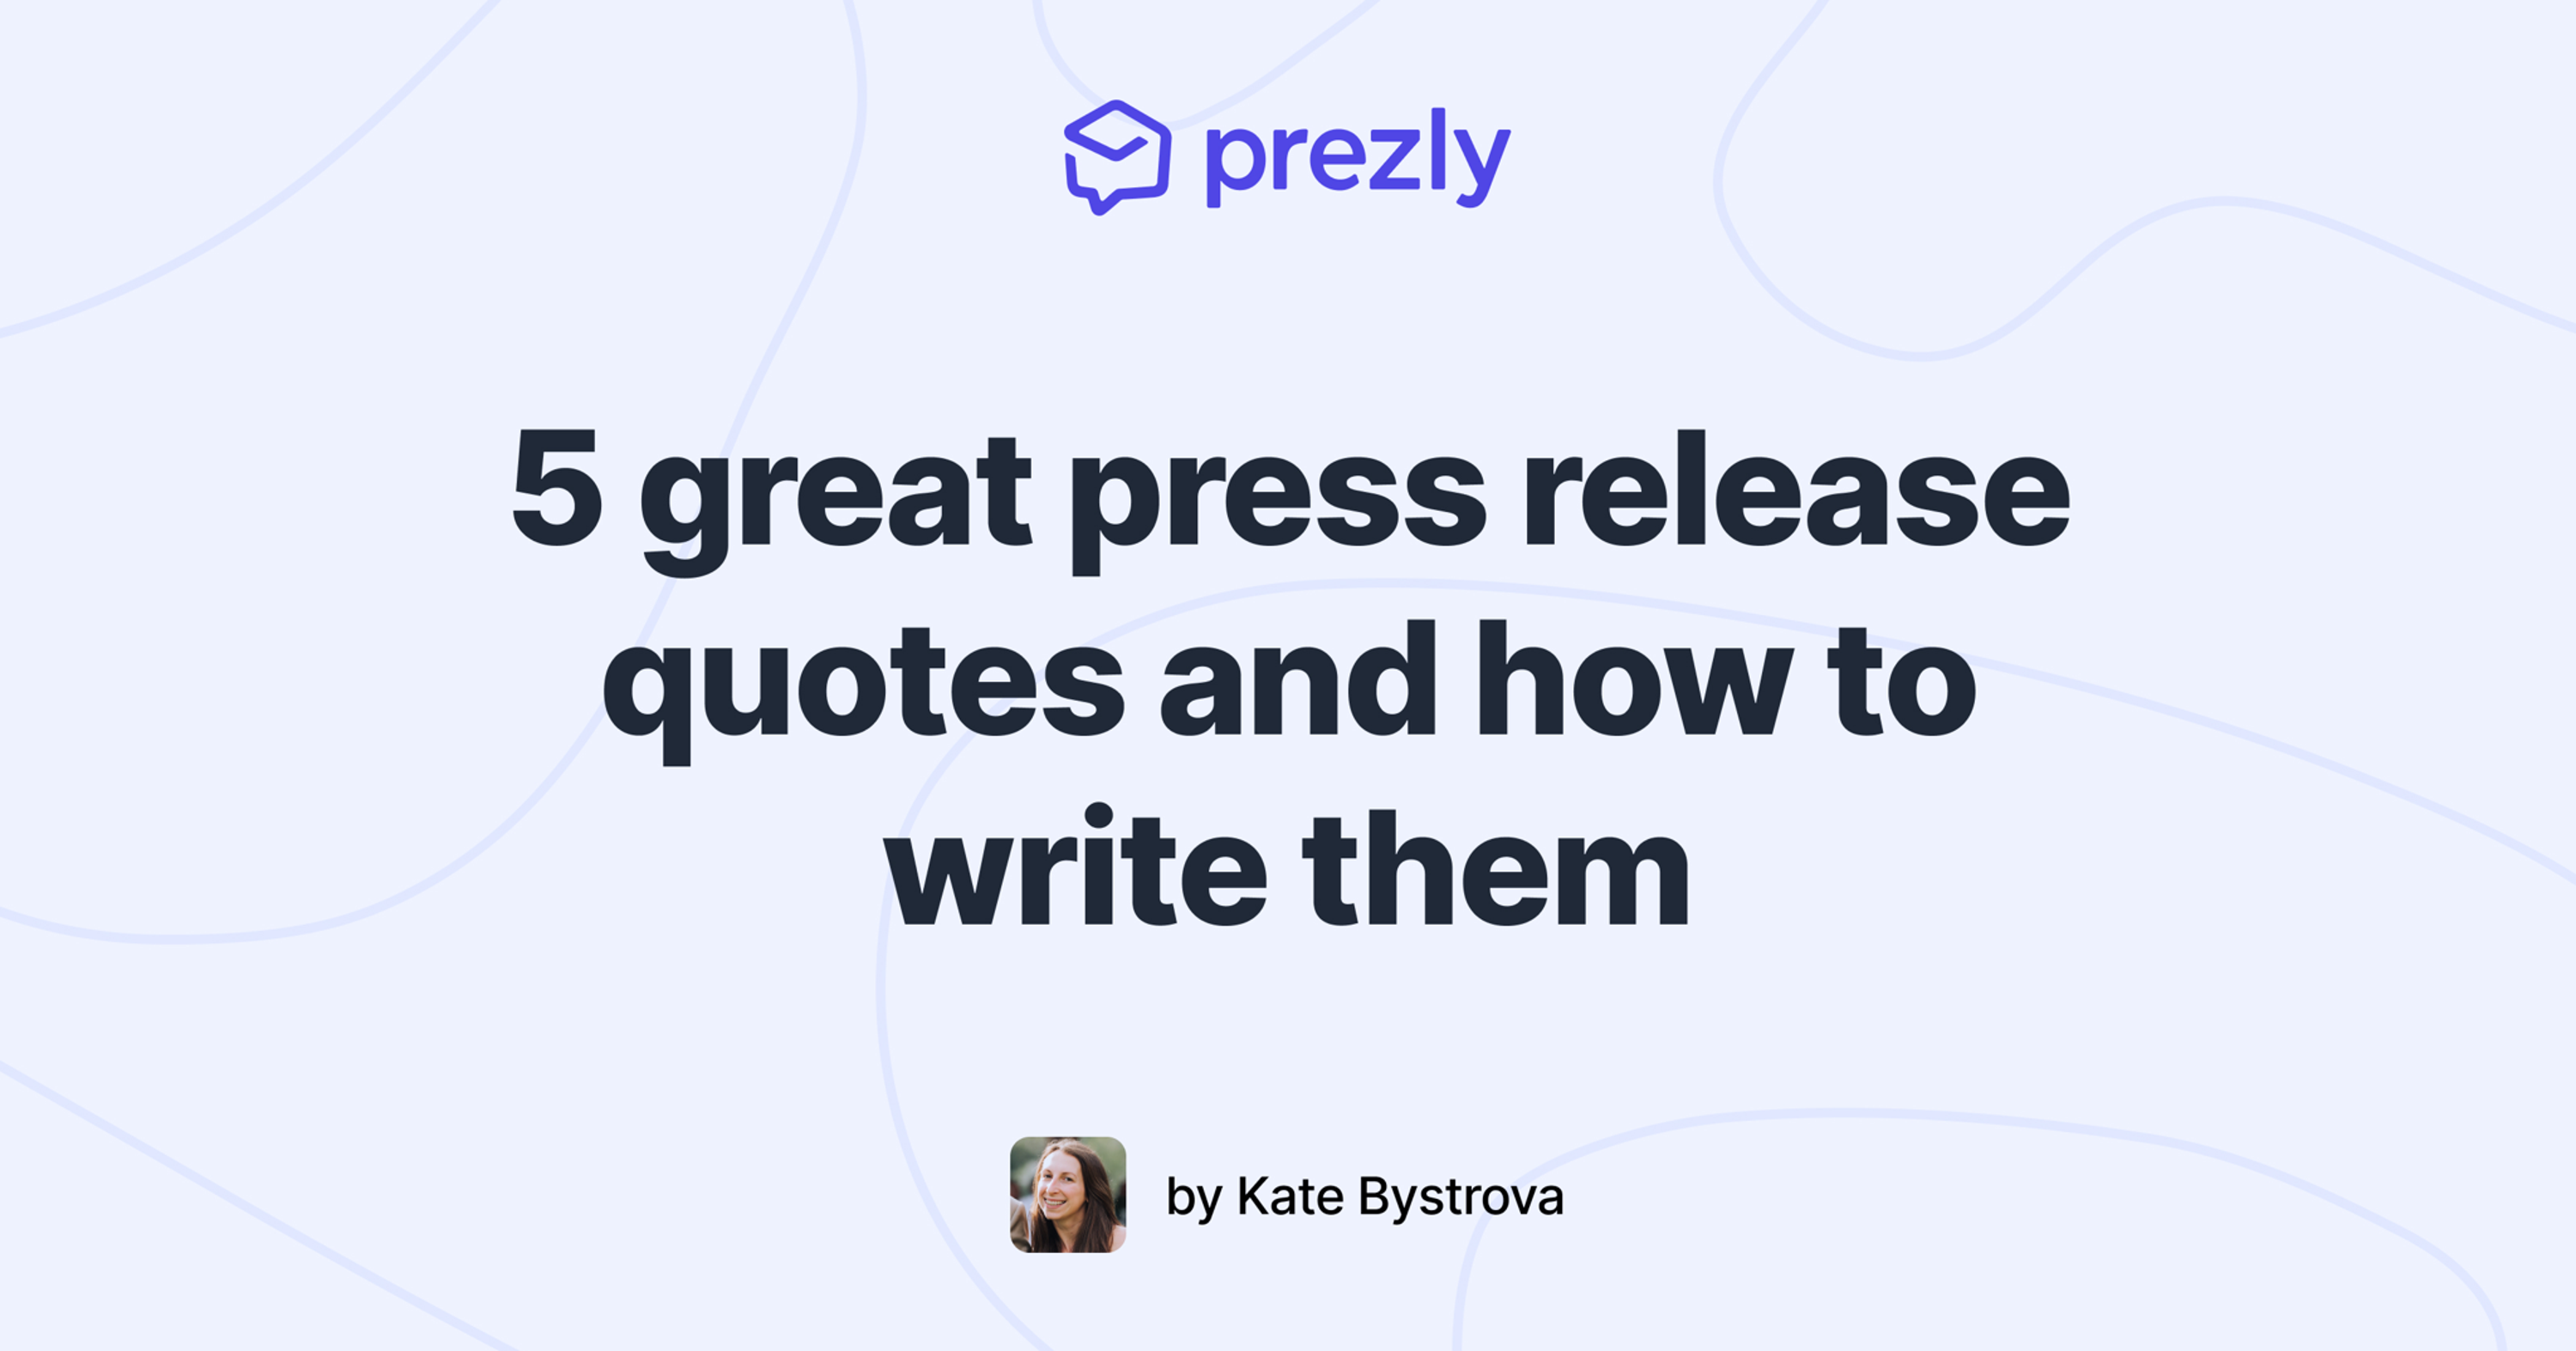 5 great press release quotes and how to write them